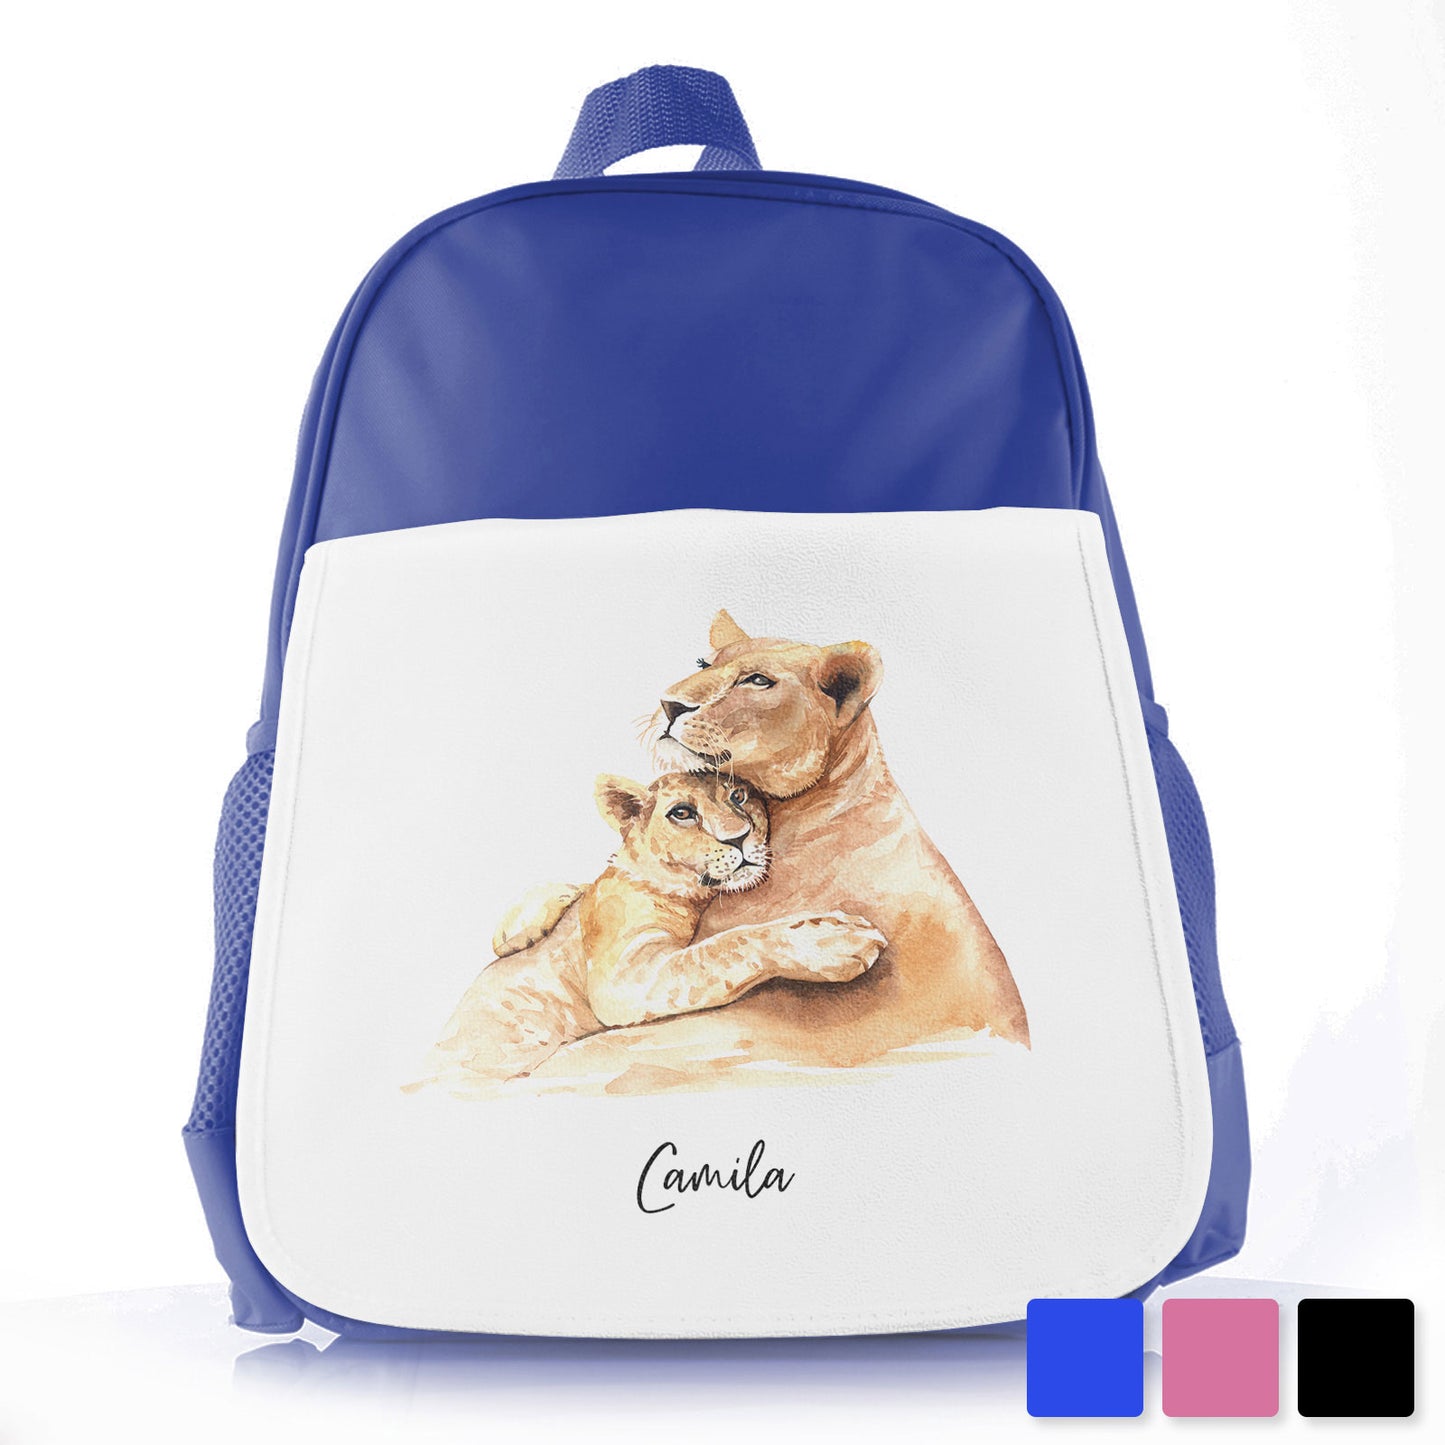 Personalised School Bag/Rucksack with Welcoming Text and Embracing Mum and Baby Lions